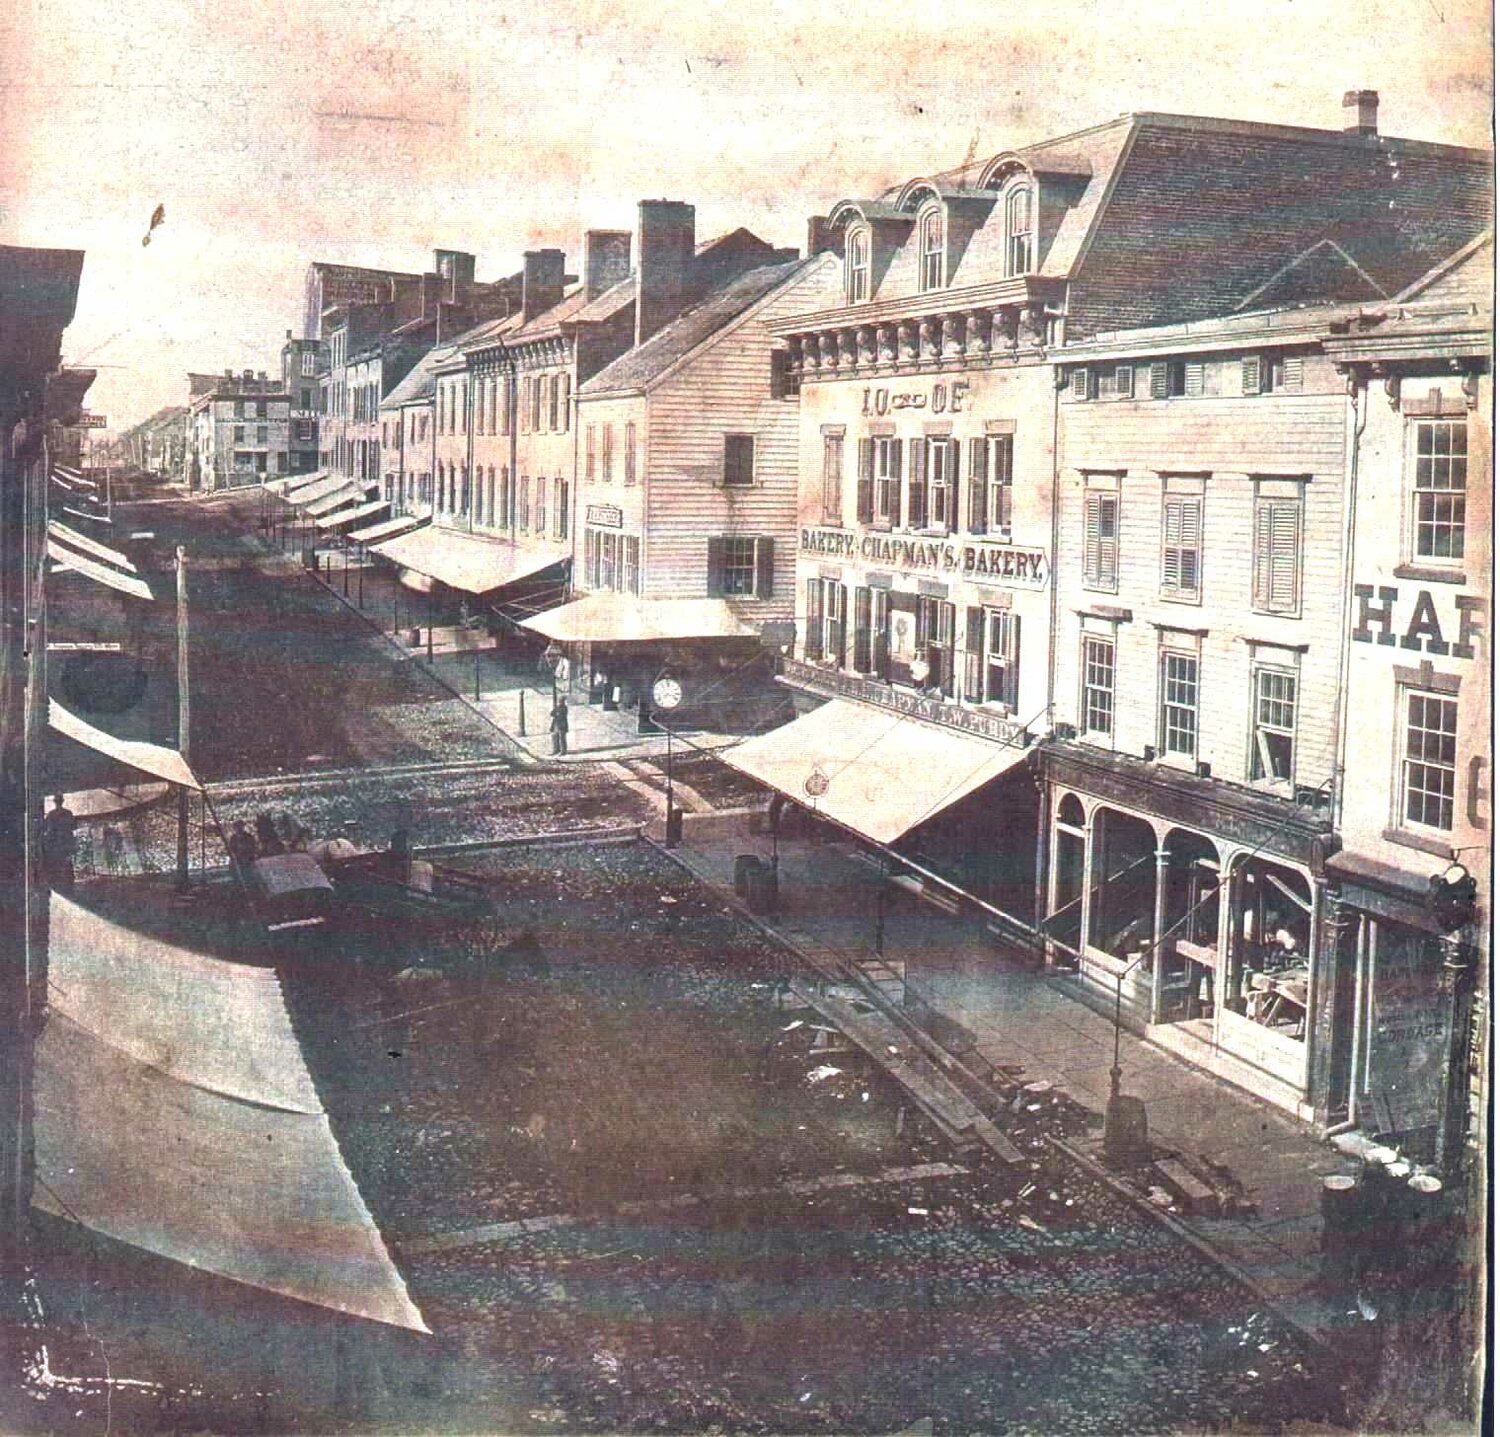 Water Street was the bustling center of commerce in 1865 Newburgh.  Here was the corner of Water and Second Streets.